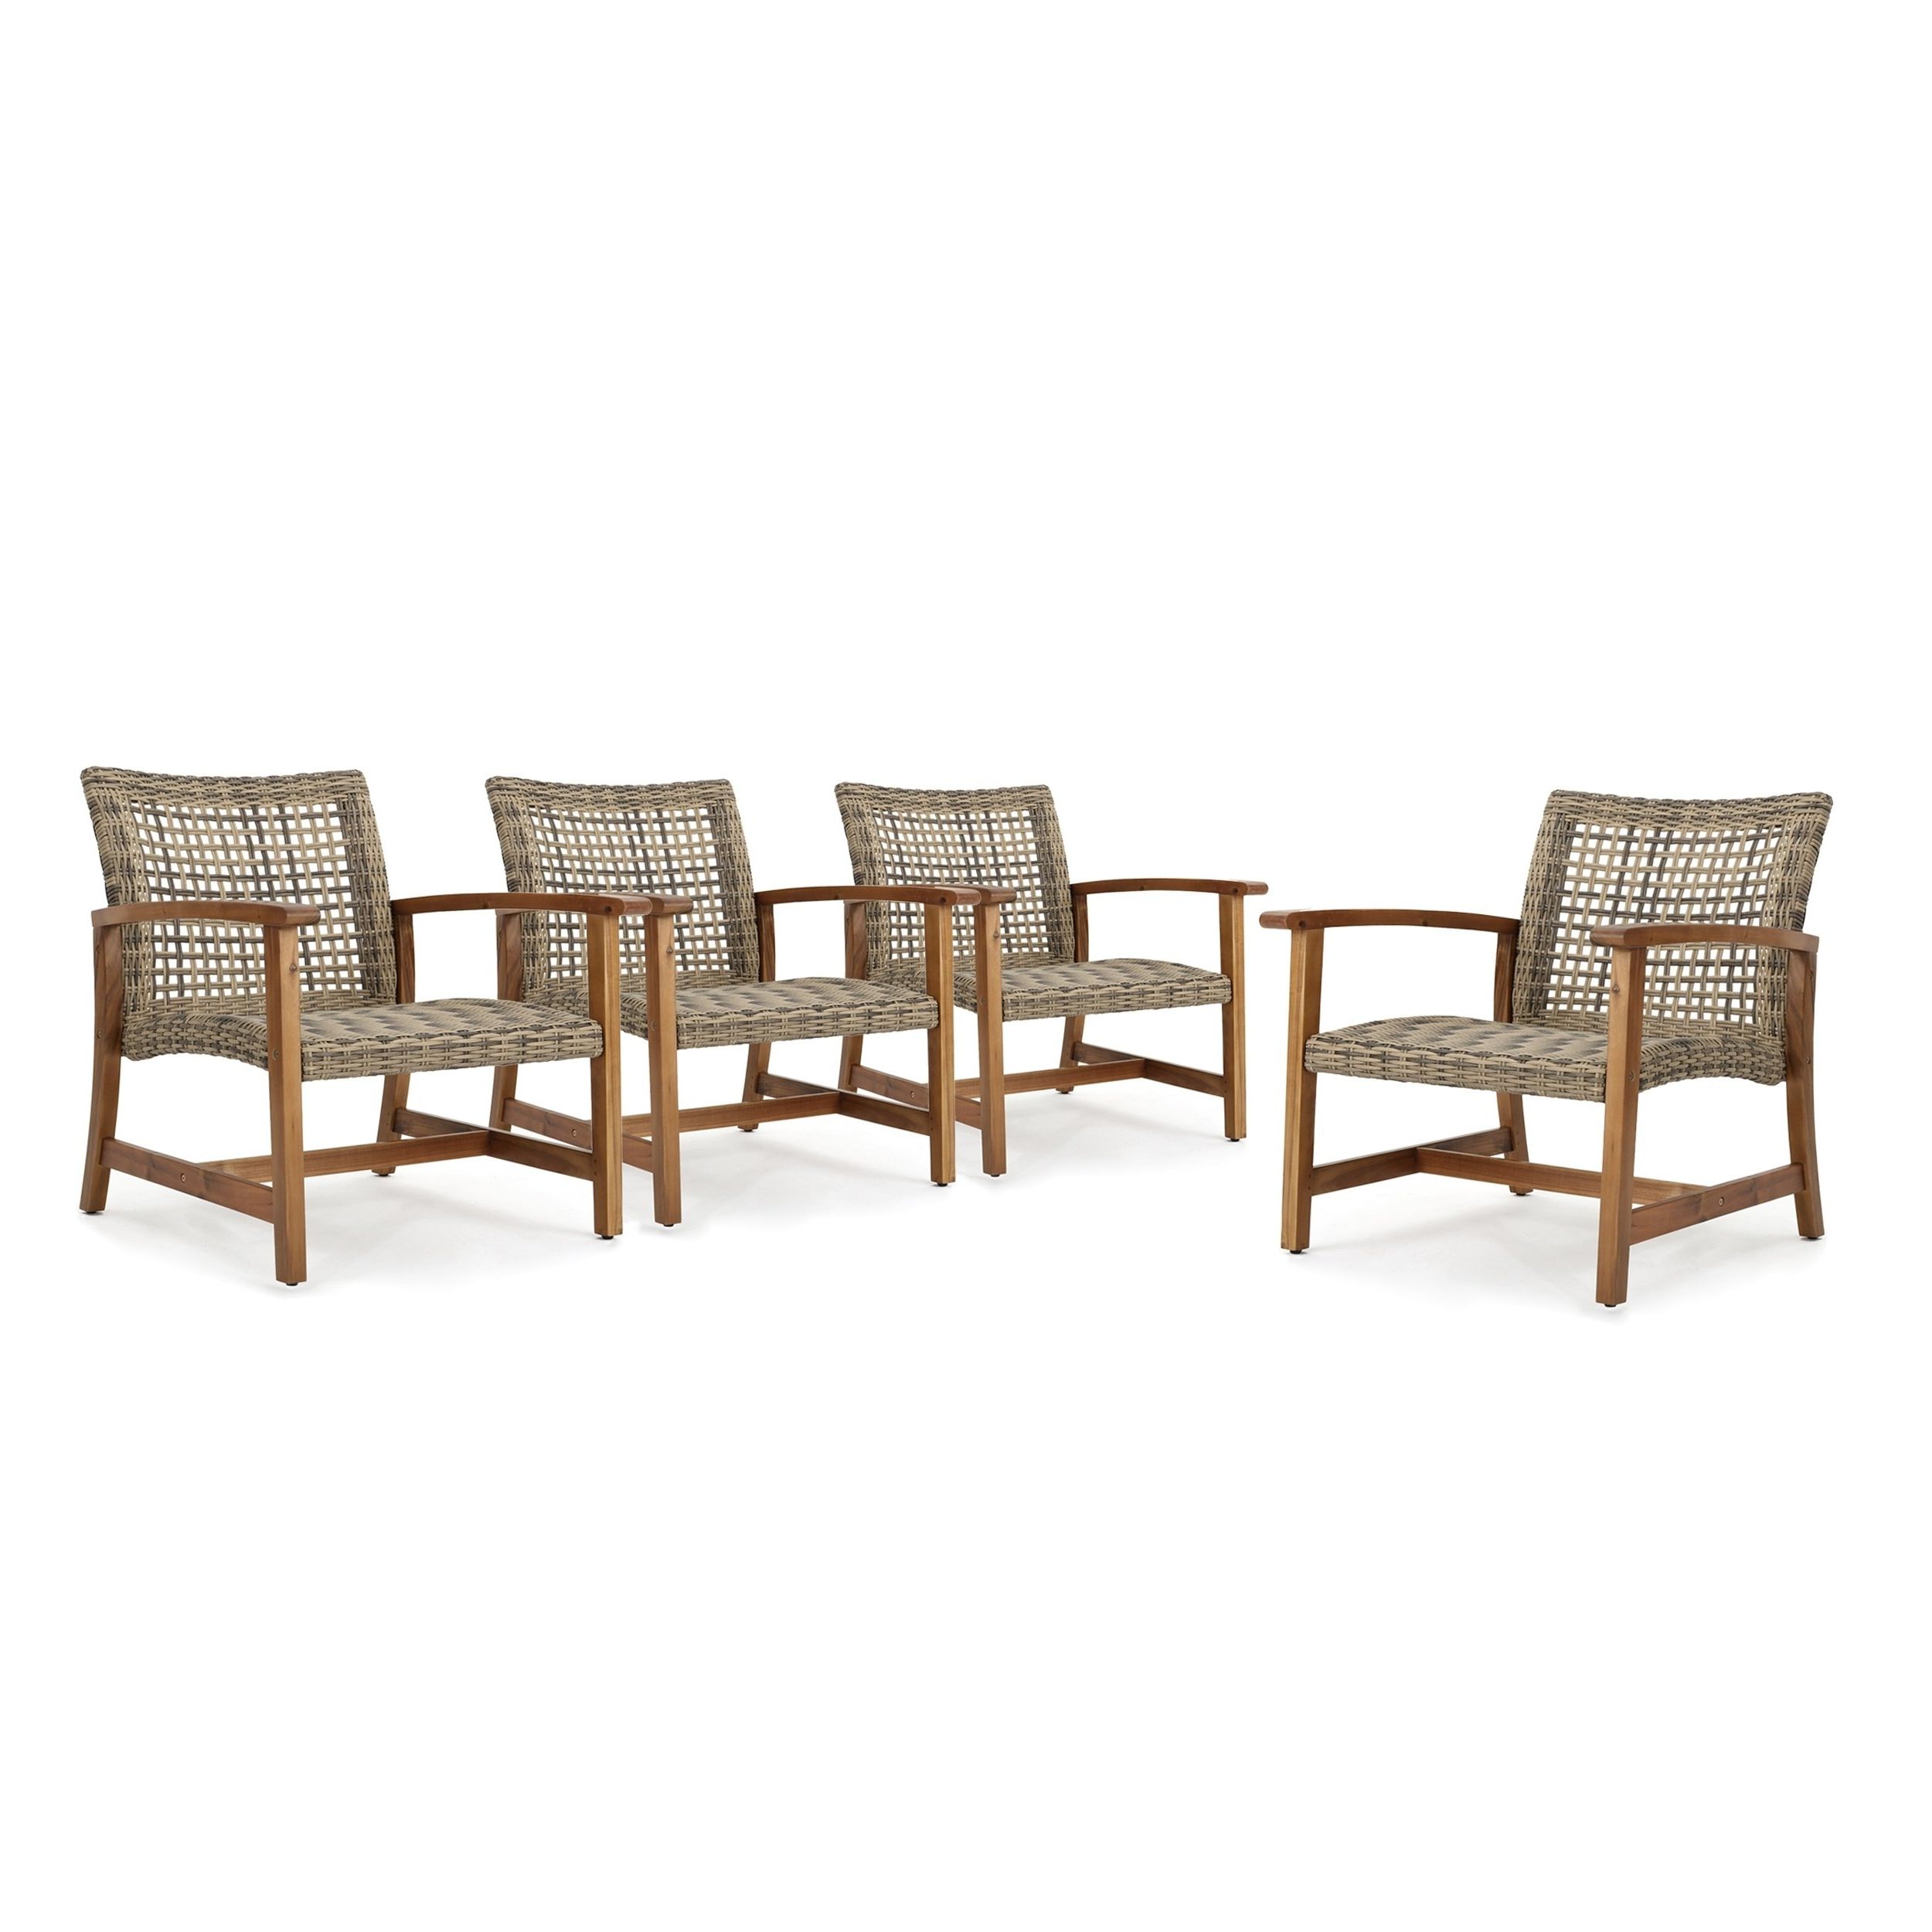 Hampton Outdoor Mid Century Wicker Club Chair (set Of 4) Regarding 2020 Hampton Outdoor Chaise Lounges Acacia Wood And Wicker (View 25 of 25)